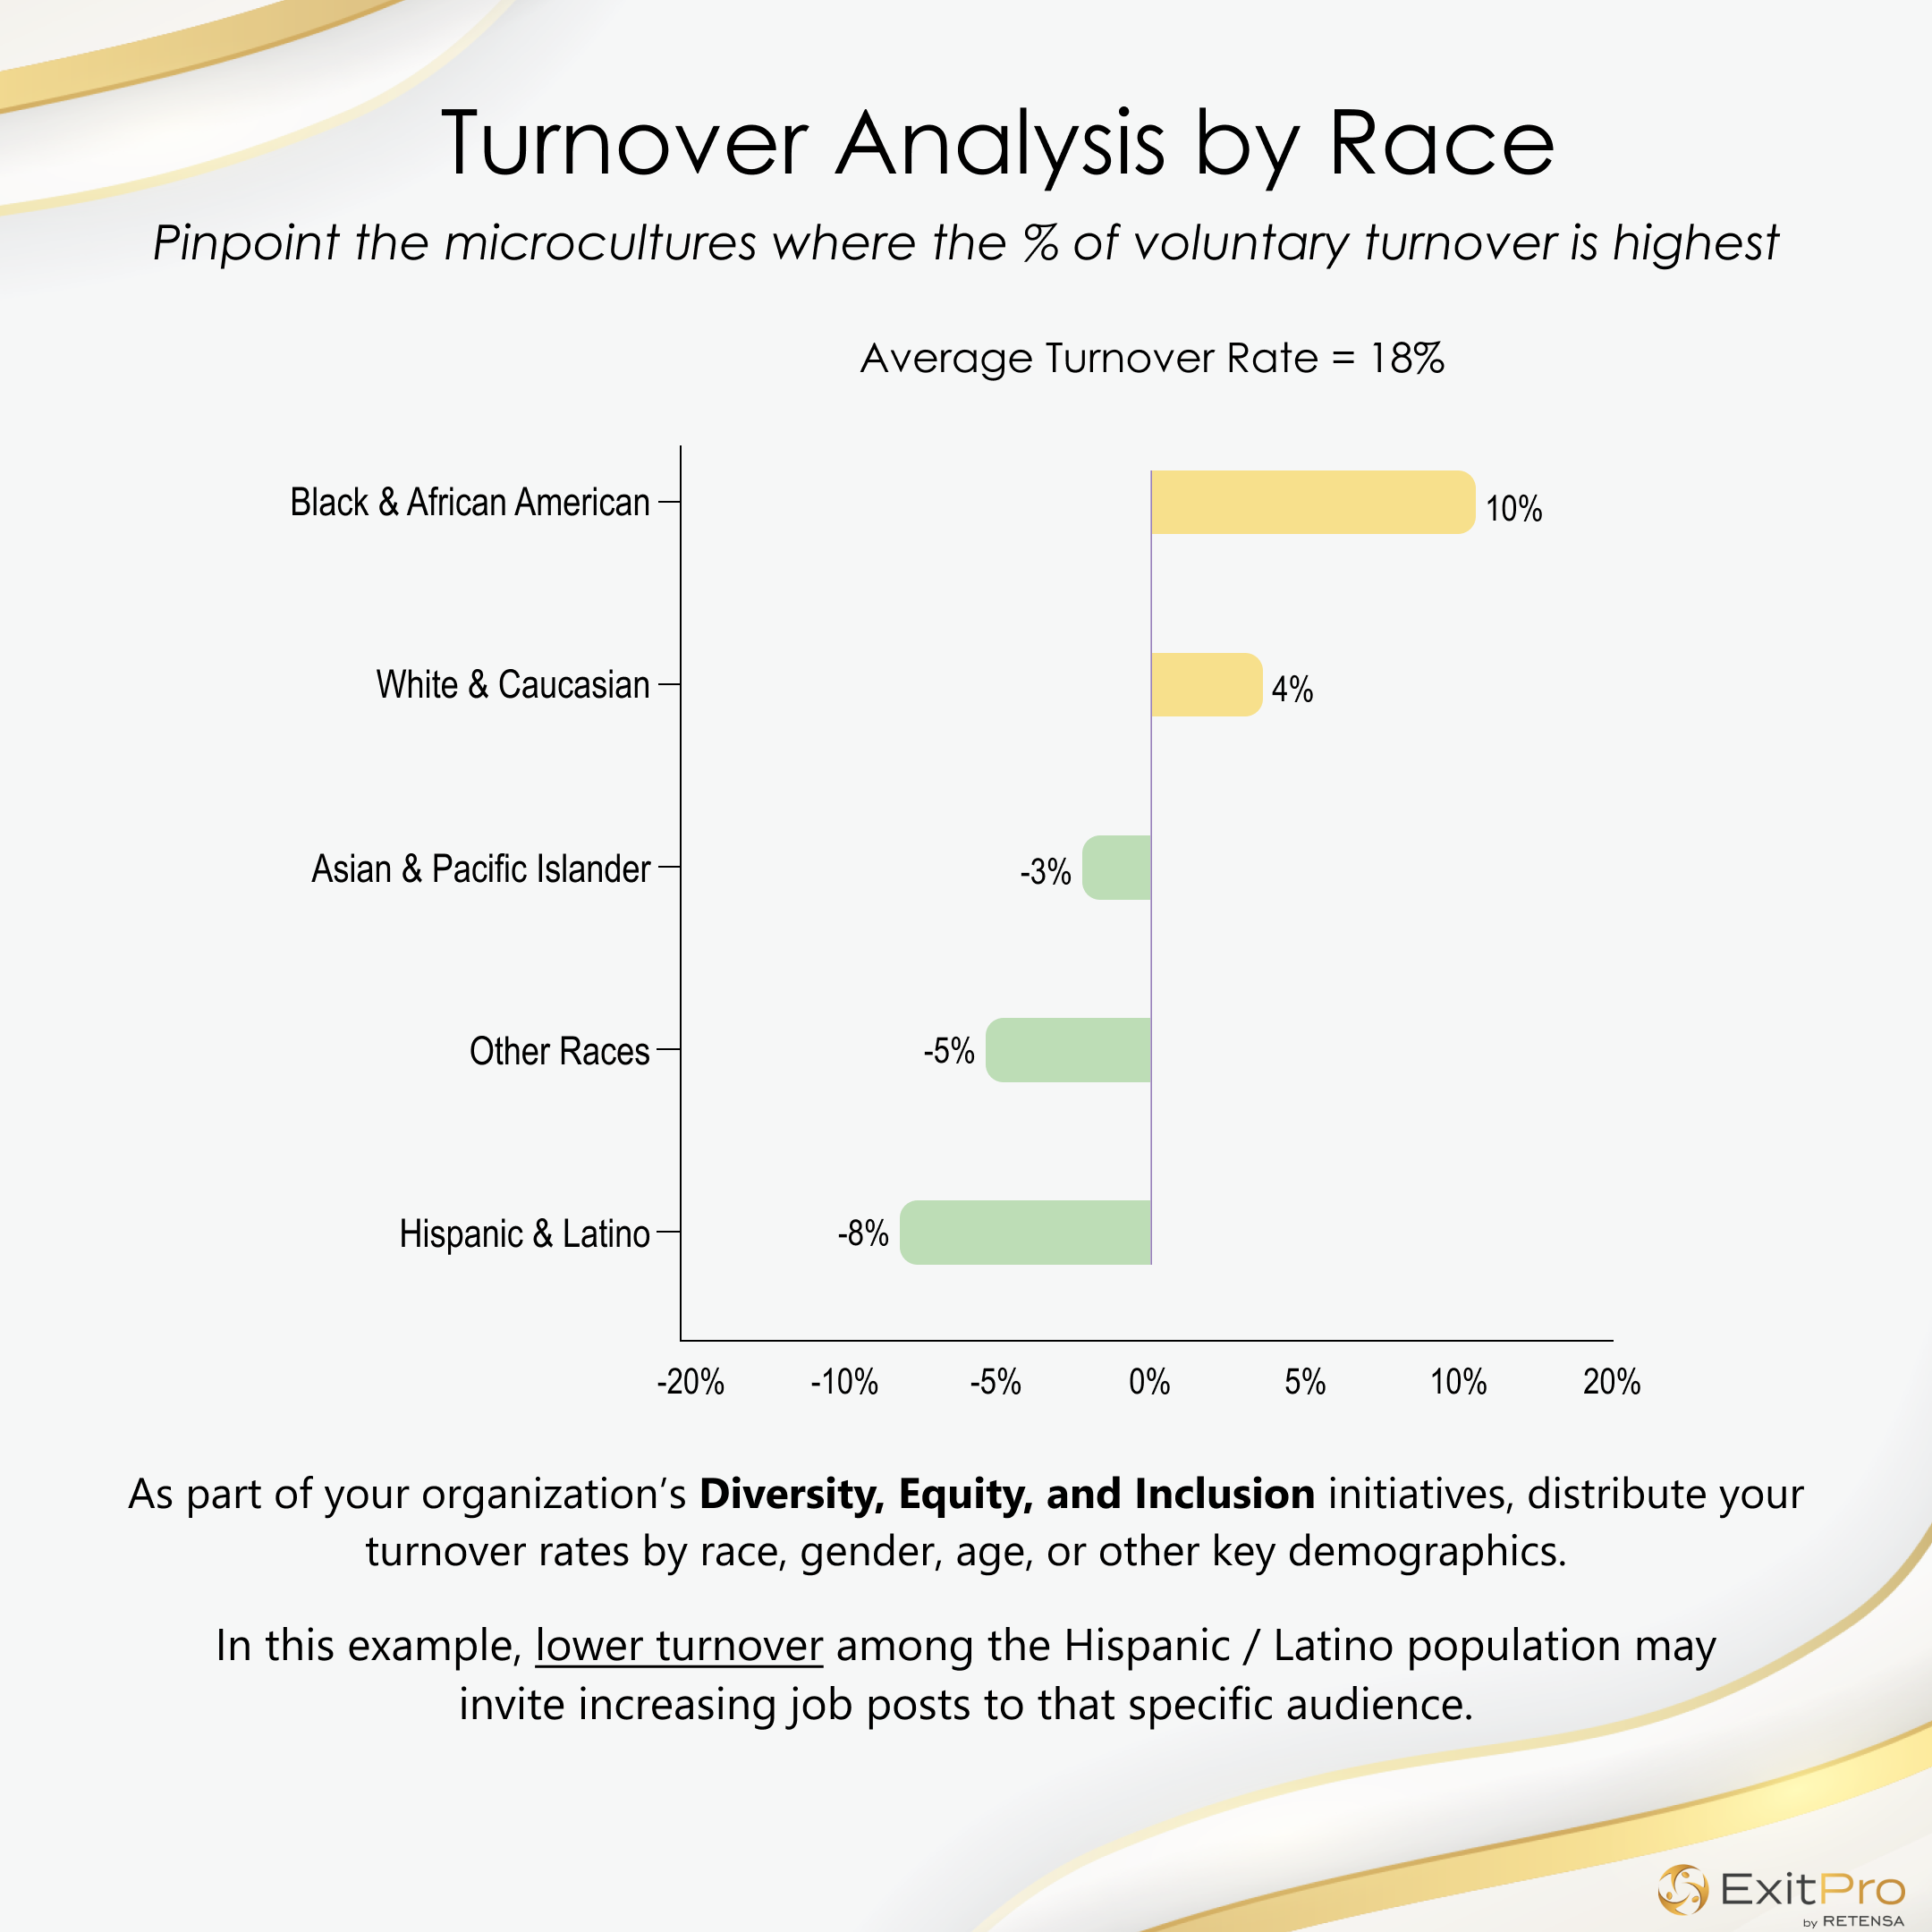 As part of your organization’s de&I initiatives, analyze employee turnover by race.